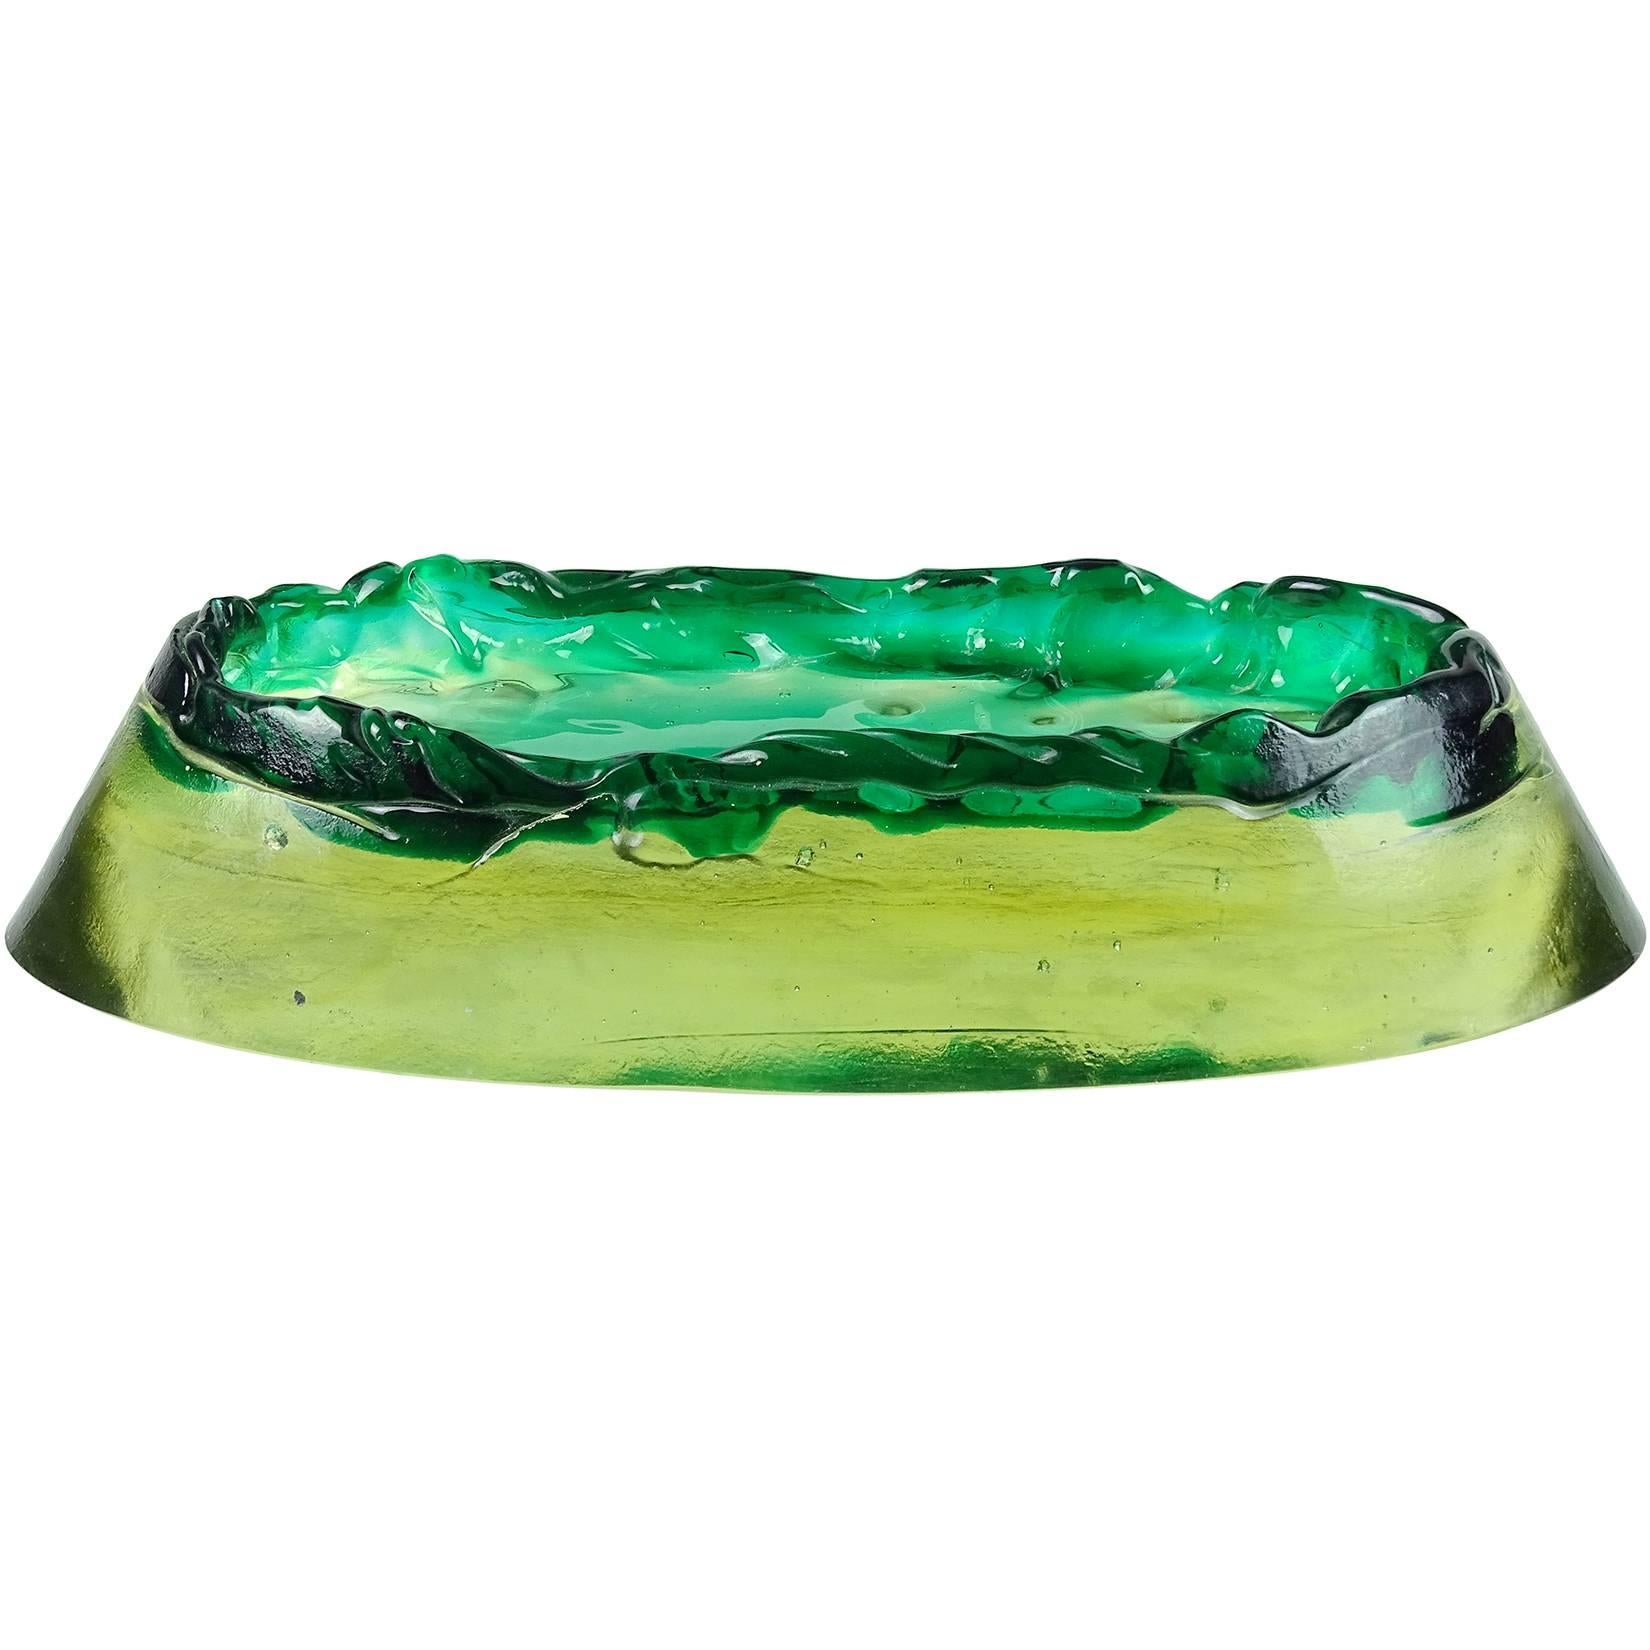 Free shipping worldwide! See details below description.

Murano green and yellow Sommerso volcano island with mountain range rim art glass sculptural bowl / catch all. Documented to the Salviati company. Very unusual piece. Measures 10 1/4” long.